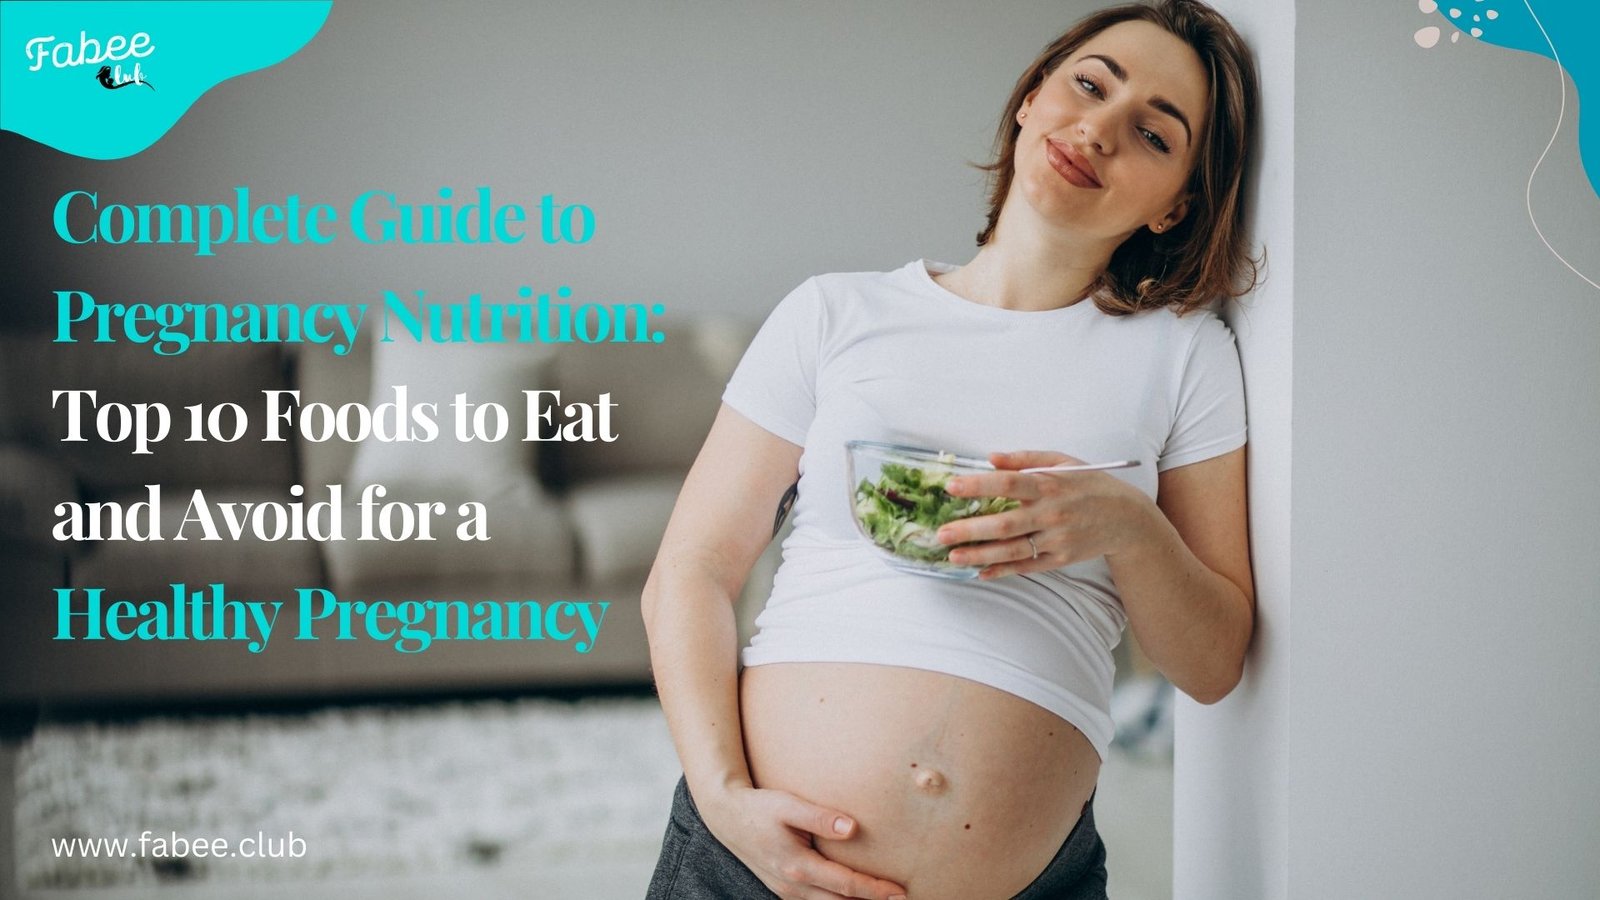 Fabee.Club_Complete Guide to Pregnancy Nutrition